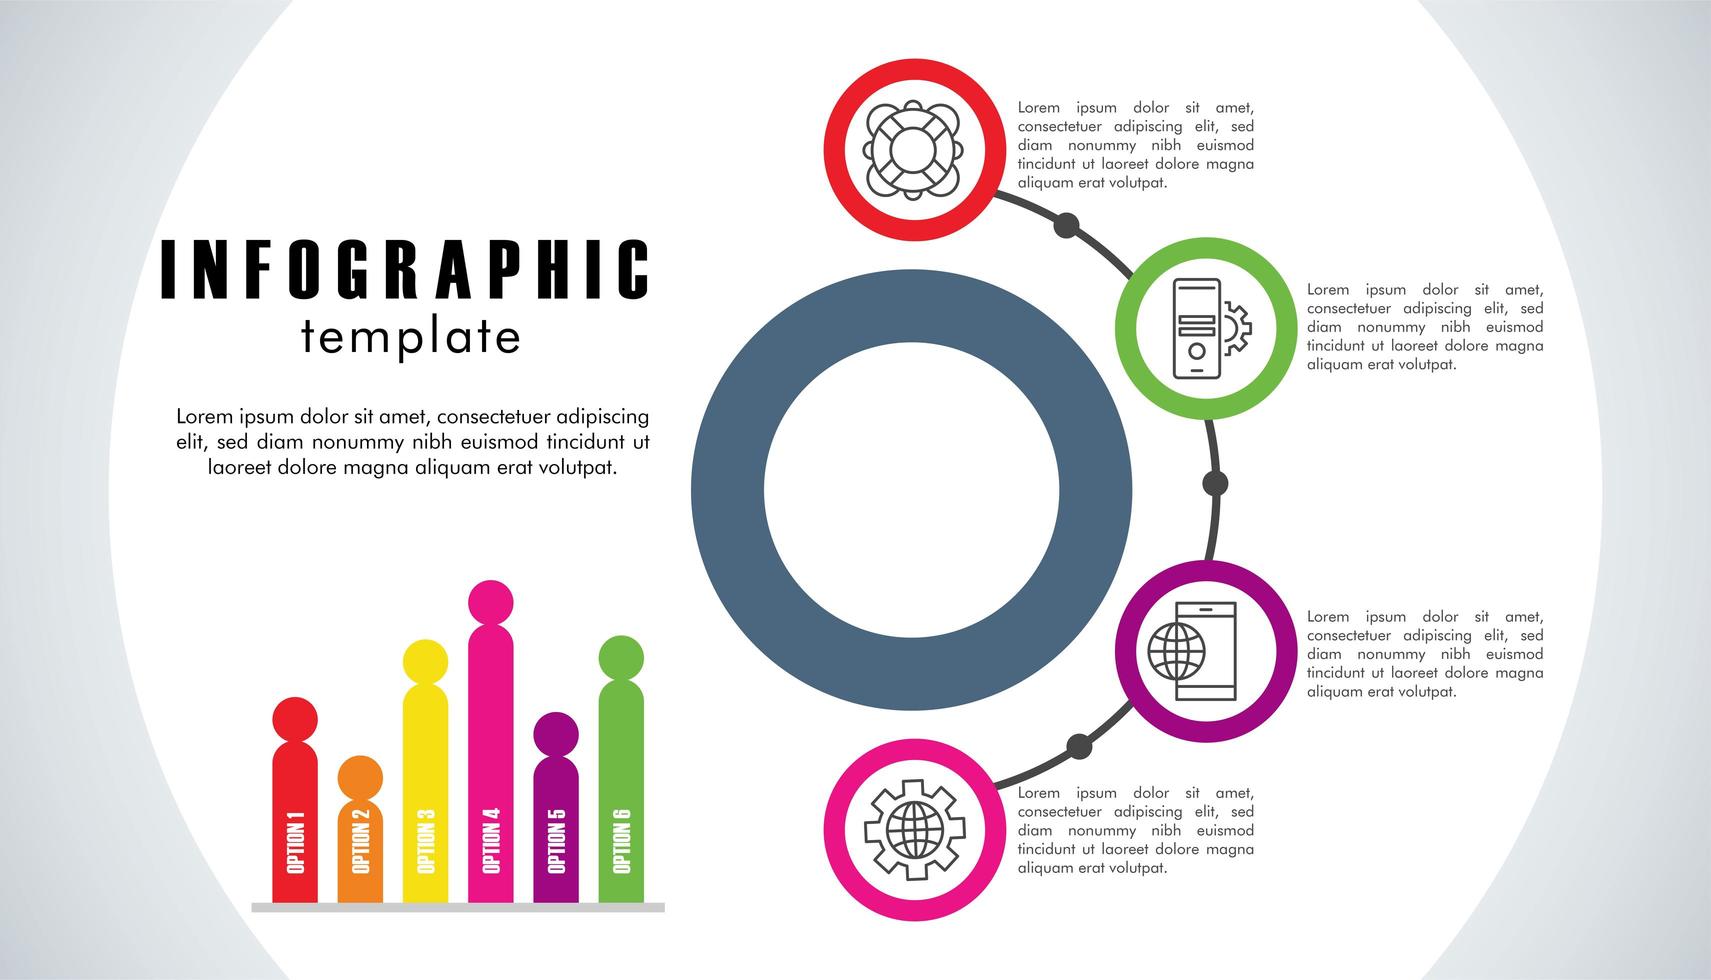 infographic template with statistics in gray background vector